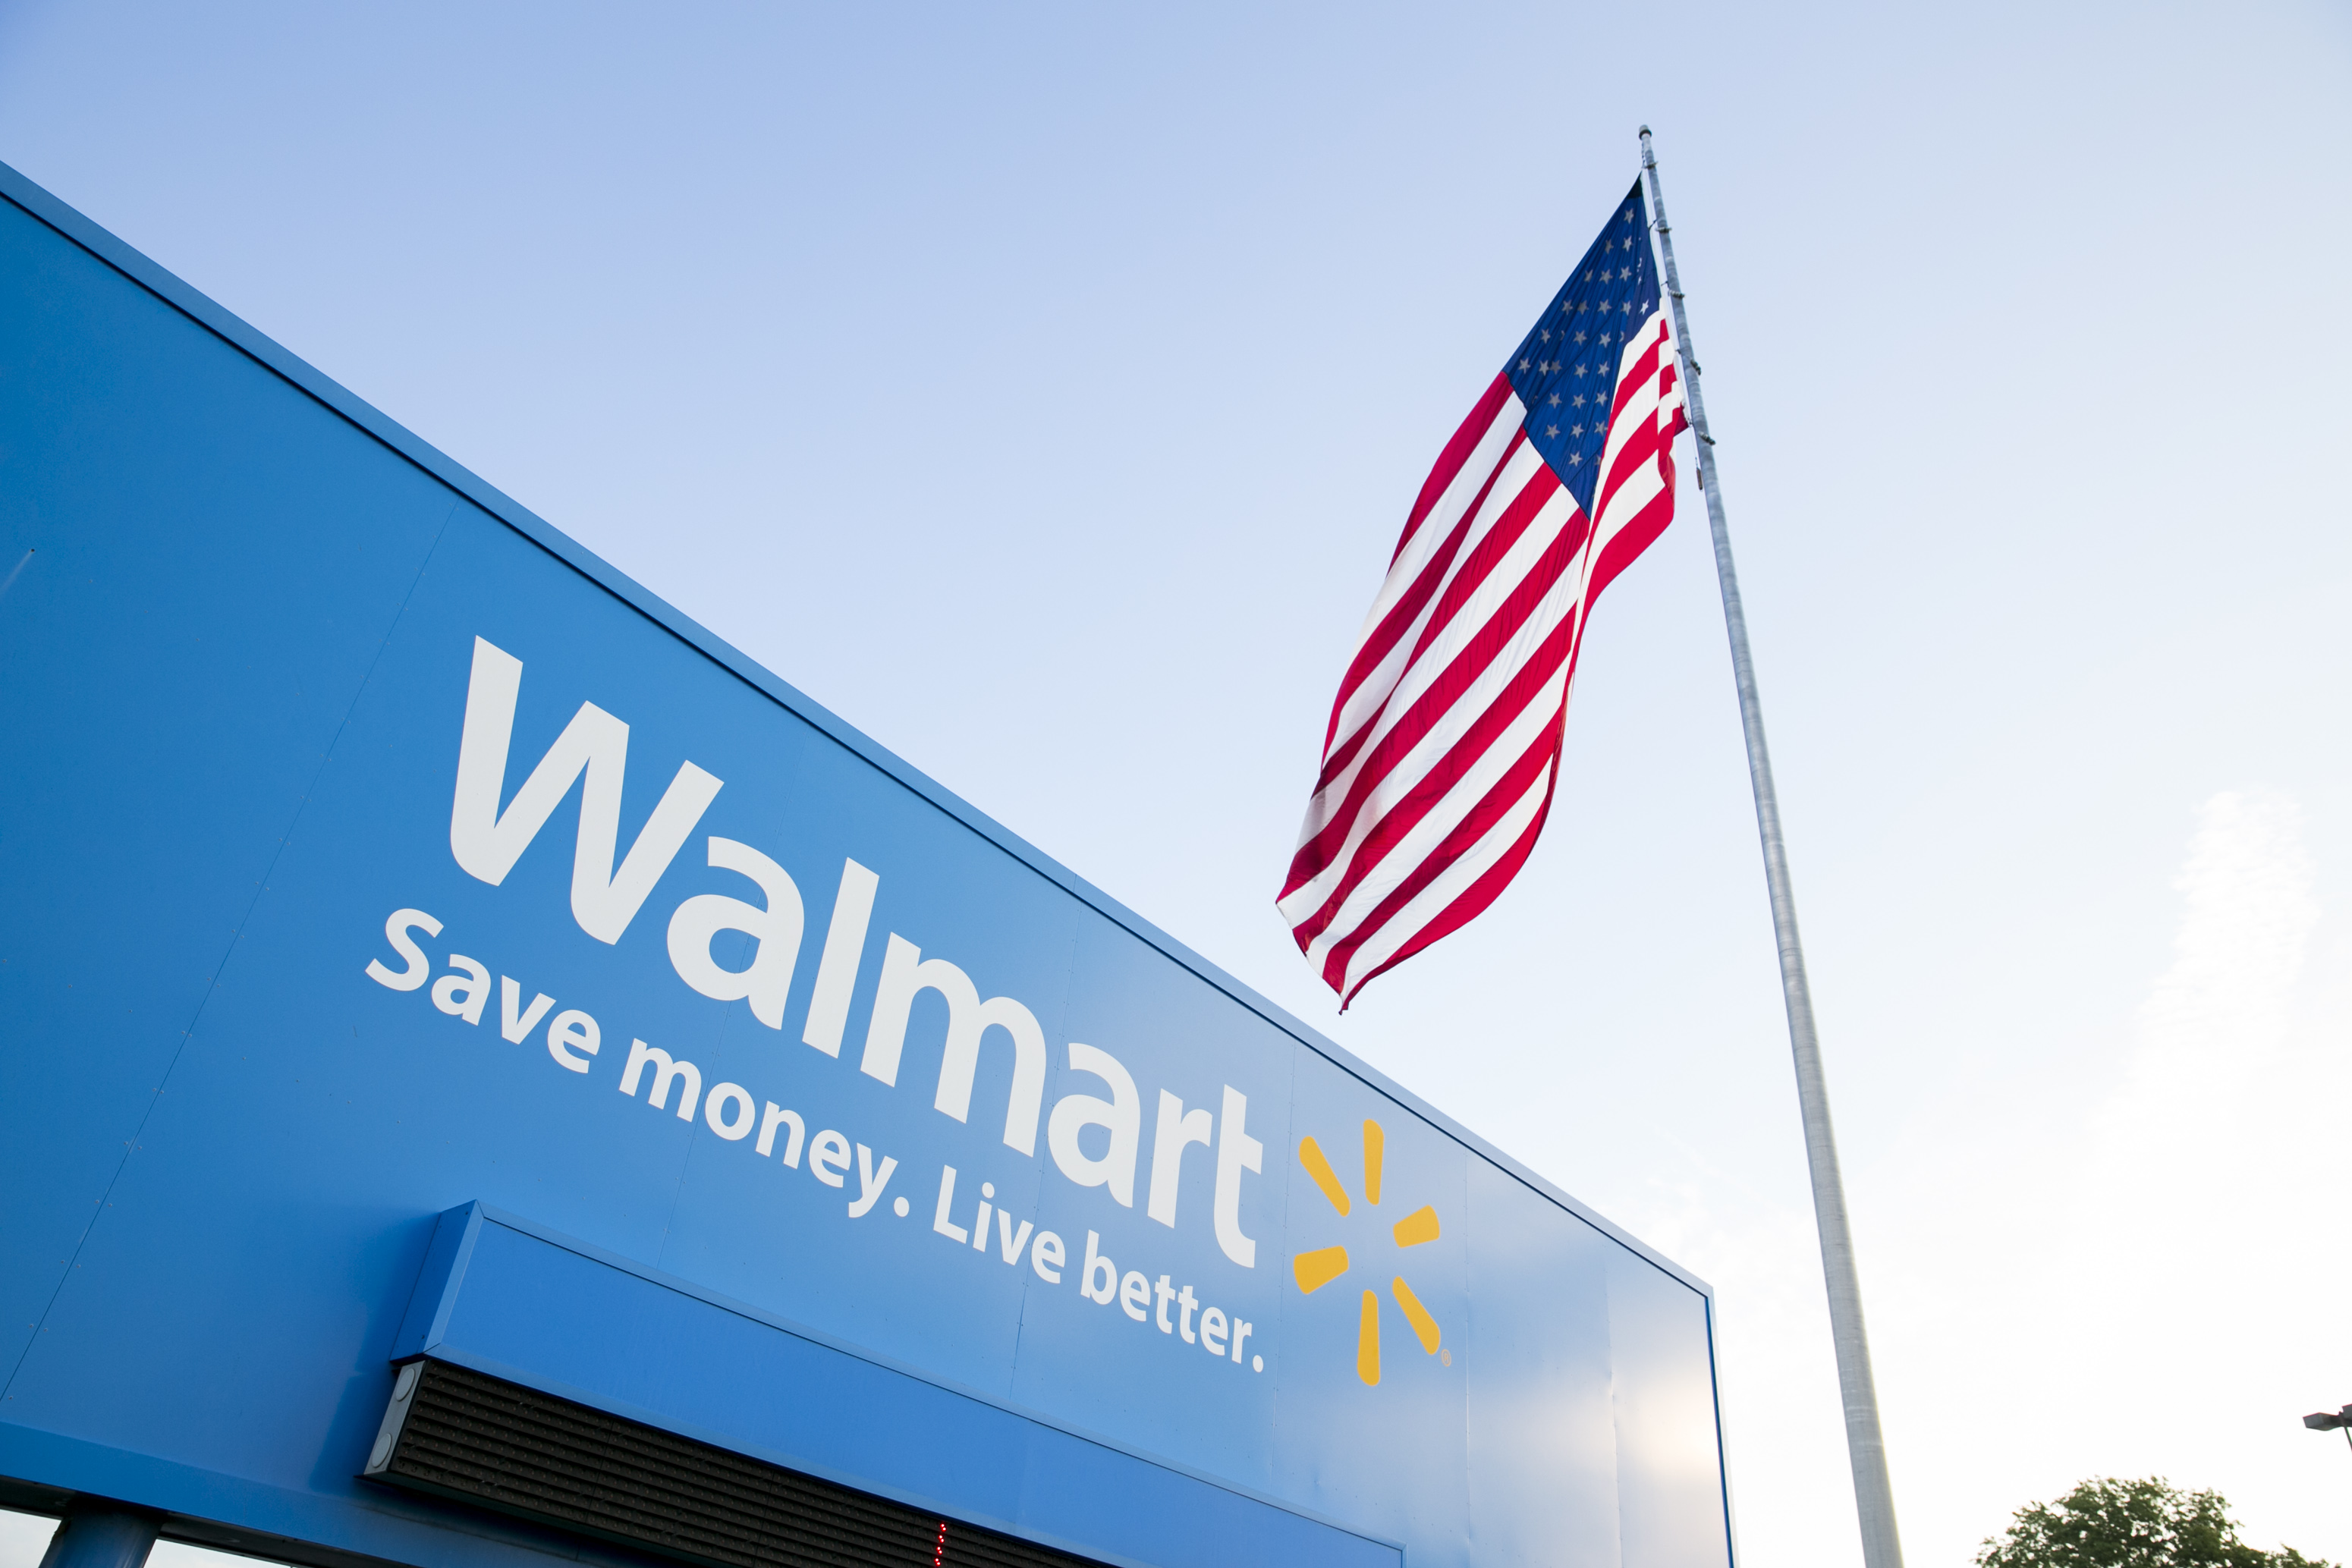 A logo sign outside of the Walmart headquarters, known as the Home Office, in Bentonville, Arkansas on August 18, 2015. (Kris Tripplaar/Sipa USA)